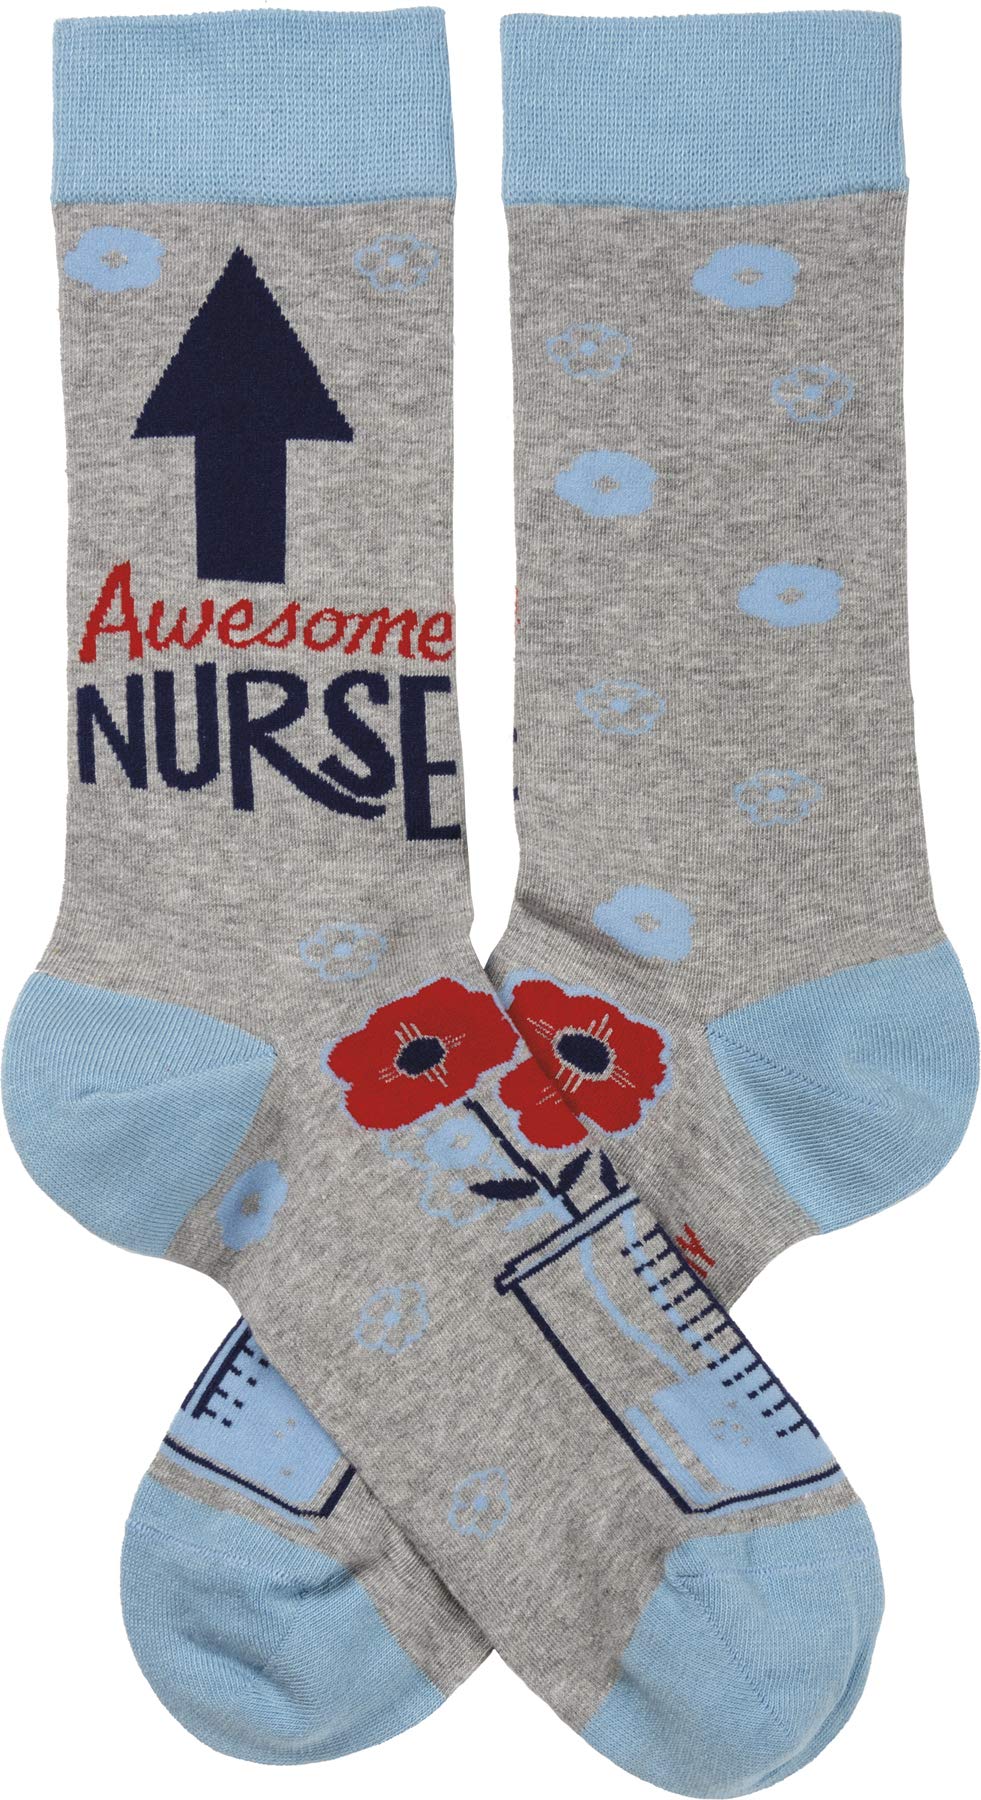 Primitives by Kathy LOL Made You Smile Silly Socks, Awesome Nurse